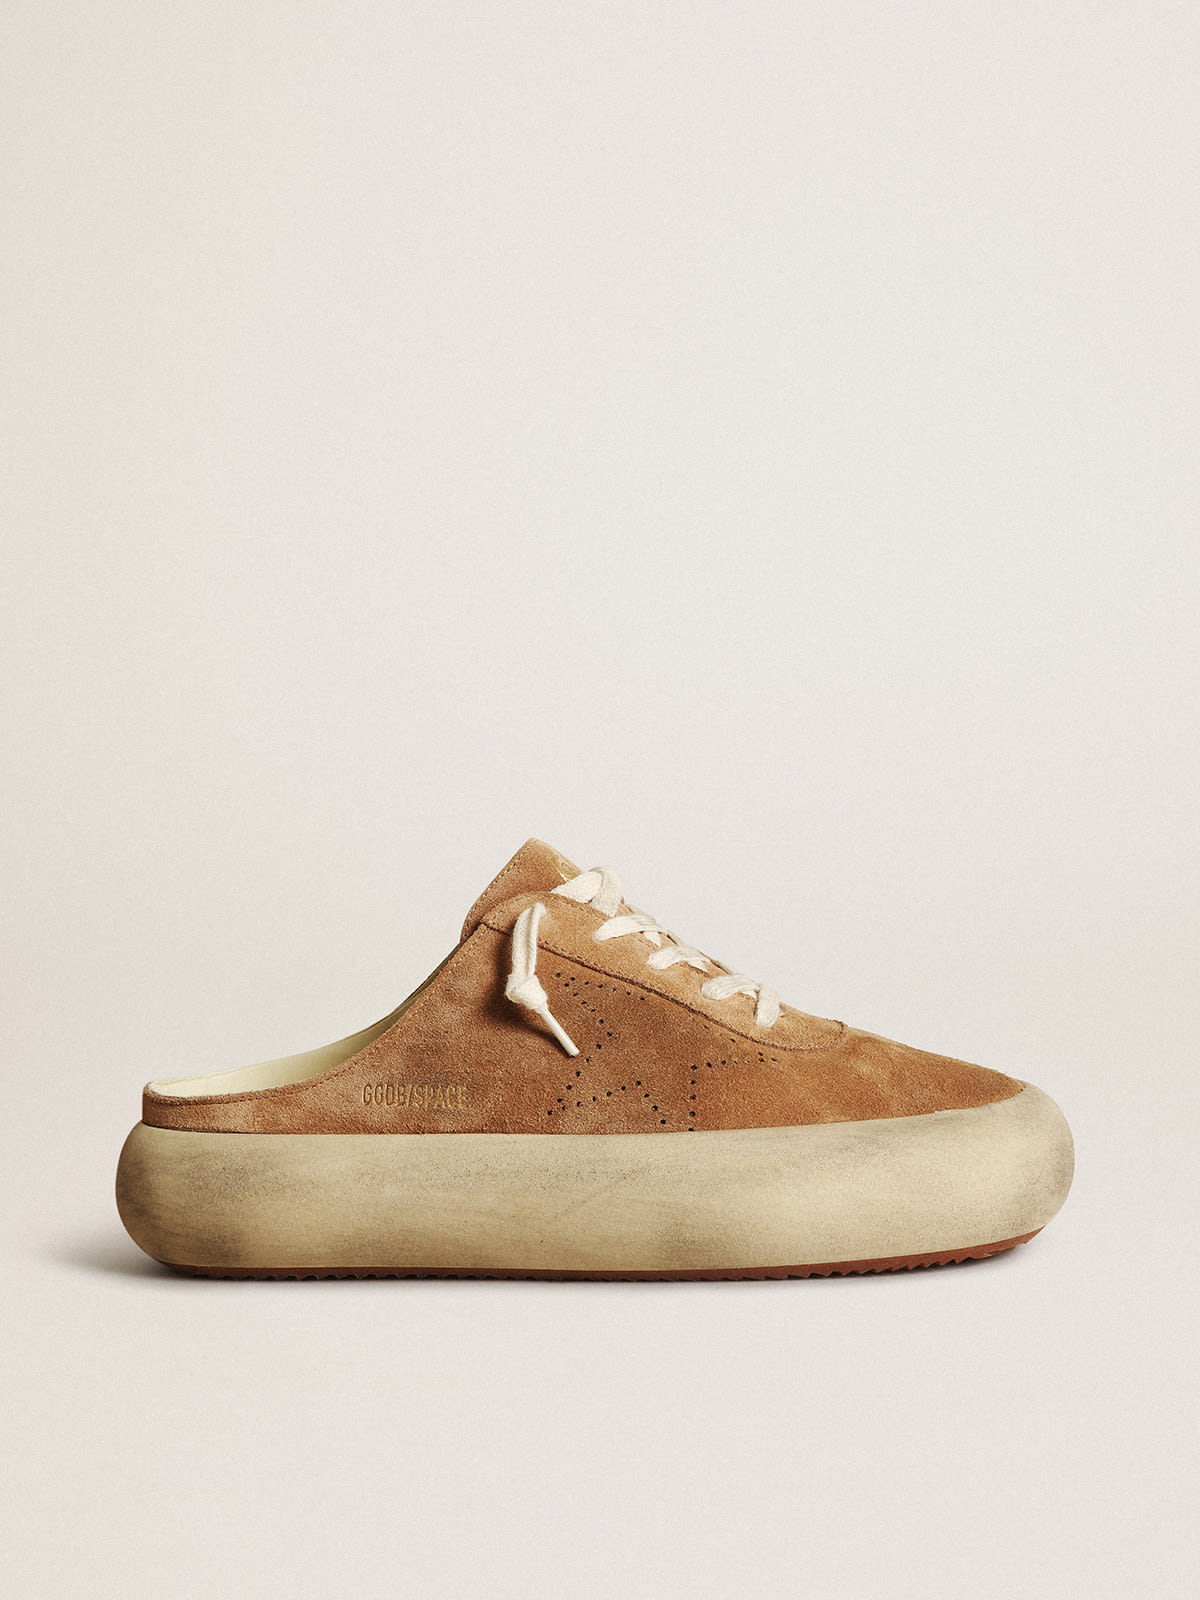 Golden Goose - Women's Space-Star Sabot in tobacco-colored suede with perforated star in 